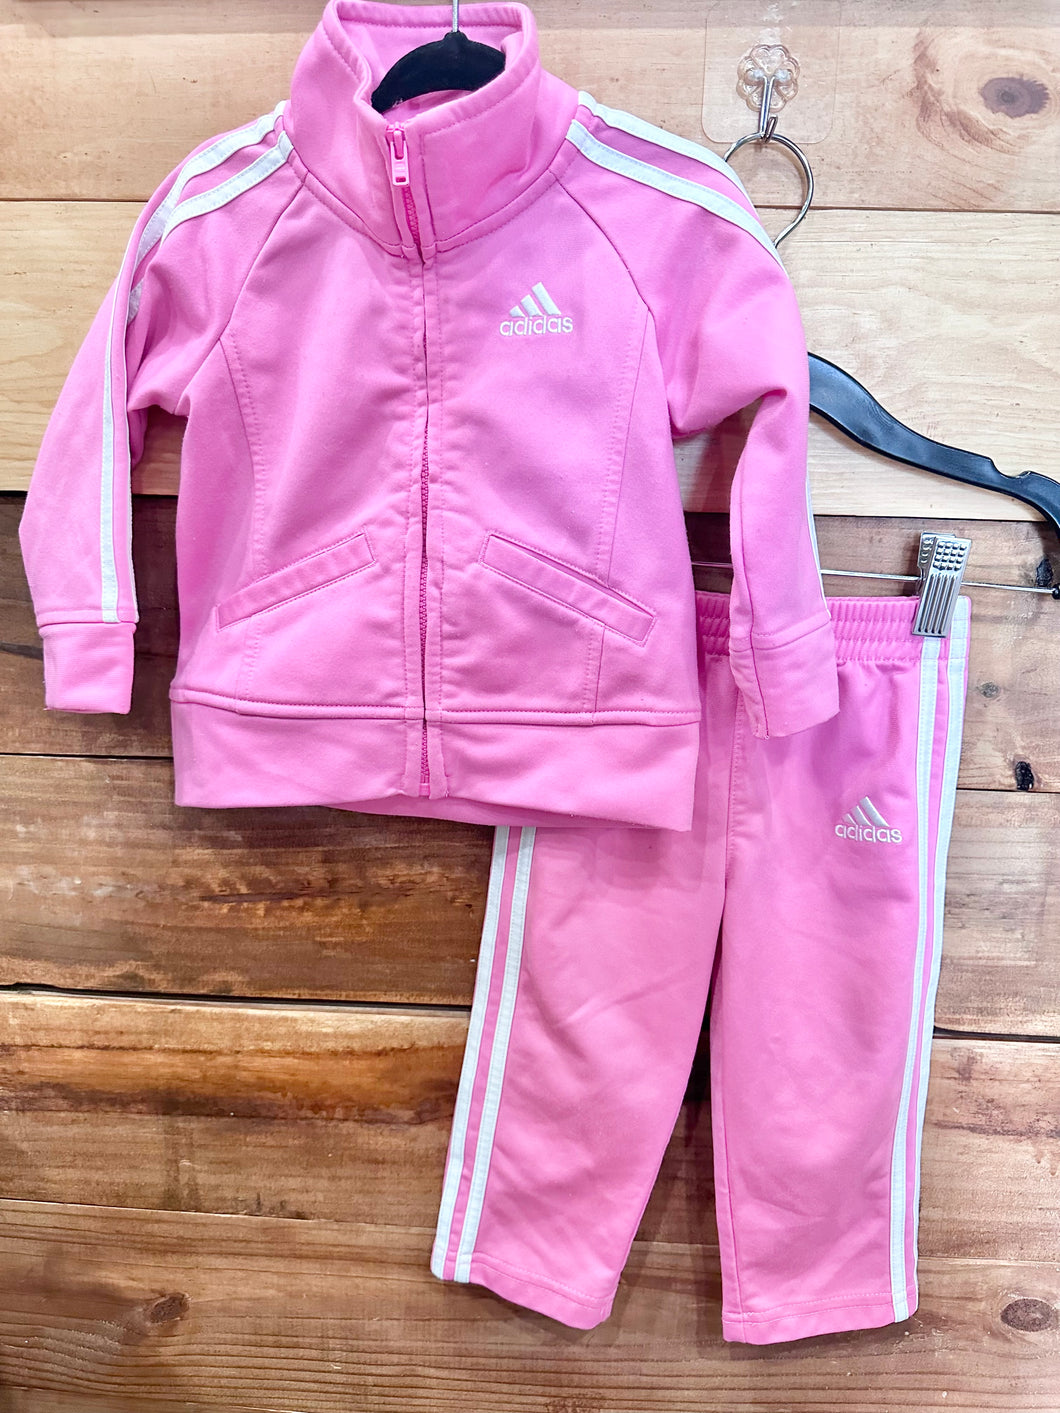 Adidas Pink 2pc Outfit Size 12m